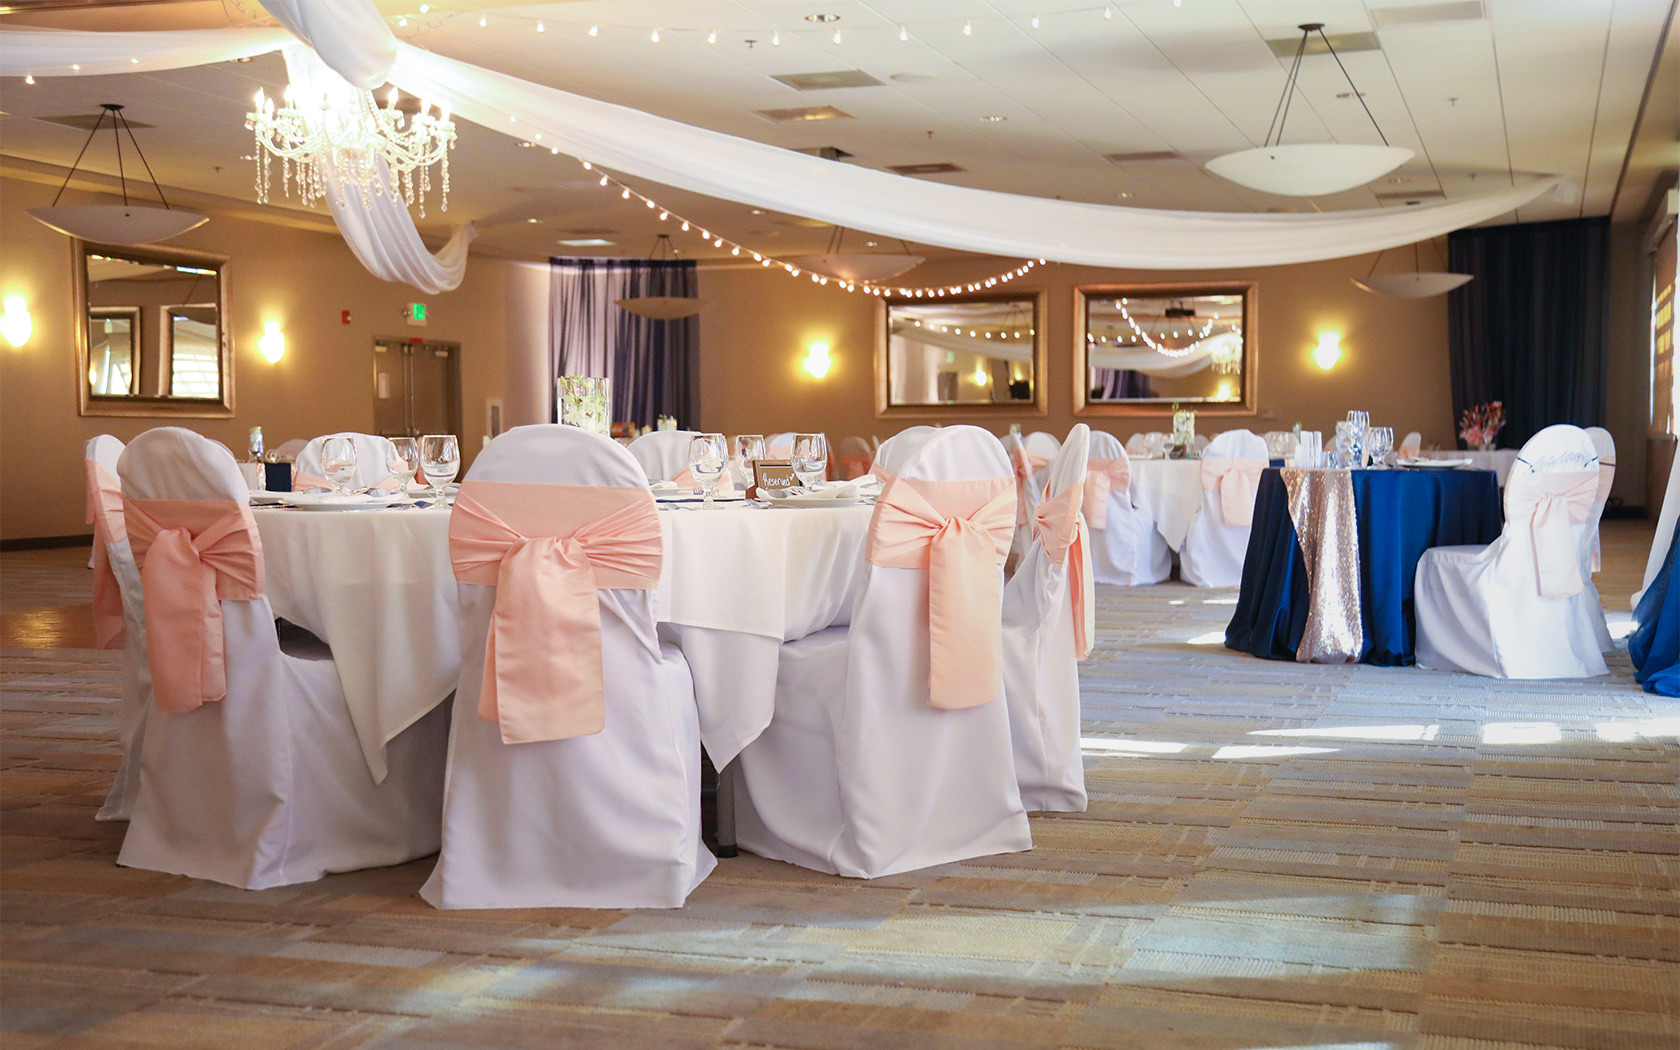 tables with white table clothes and chairs with pink bows